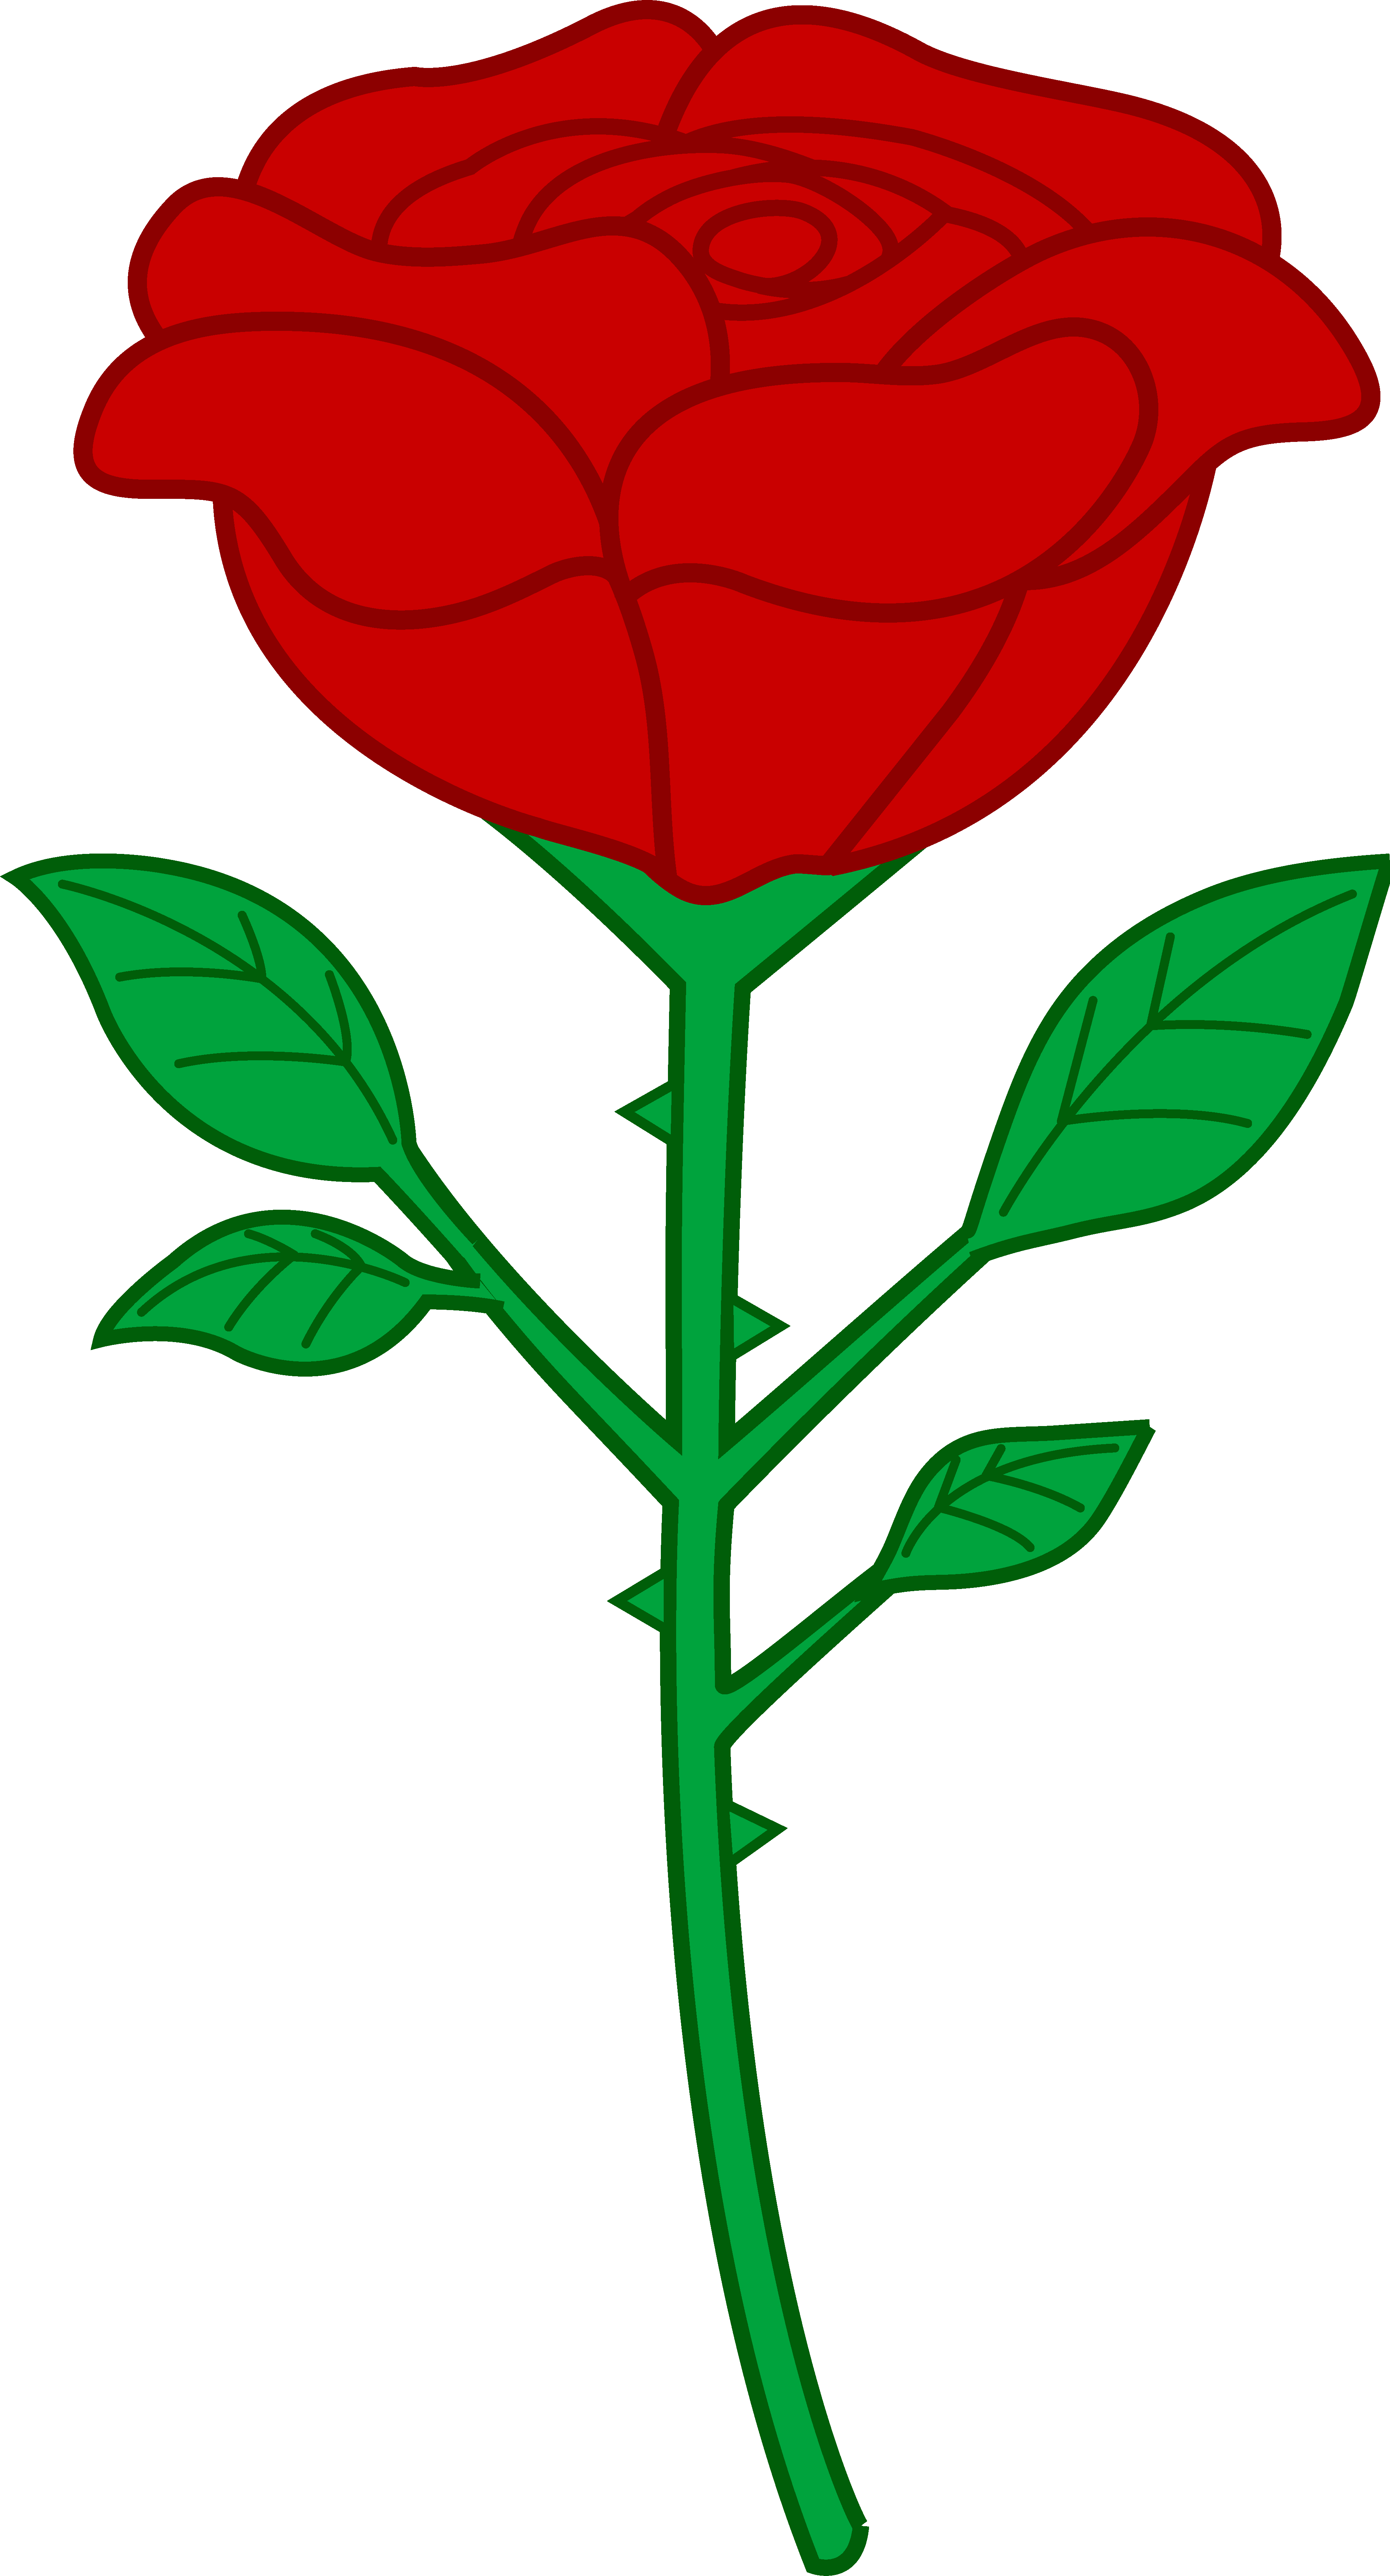 clipart rose images - photo #40